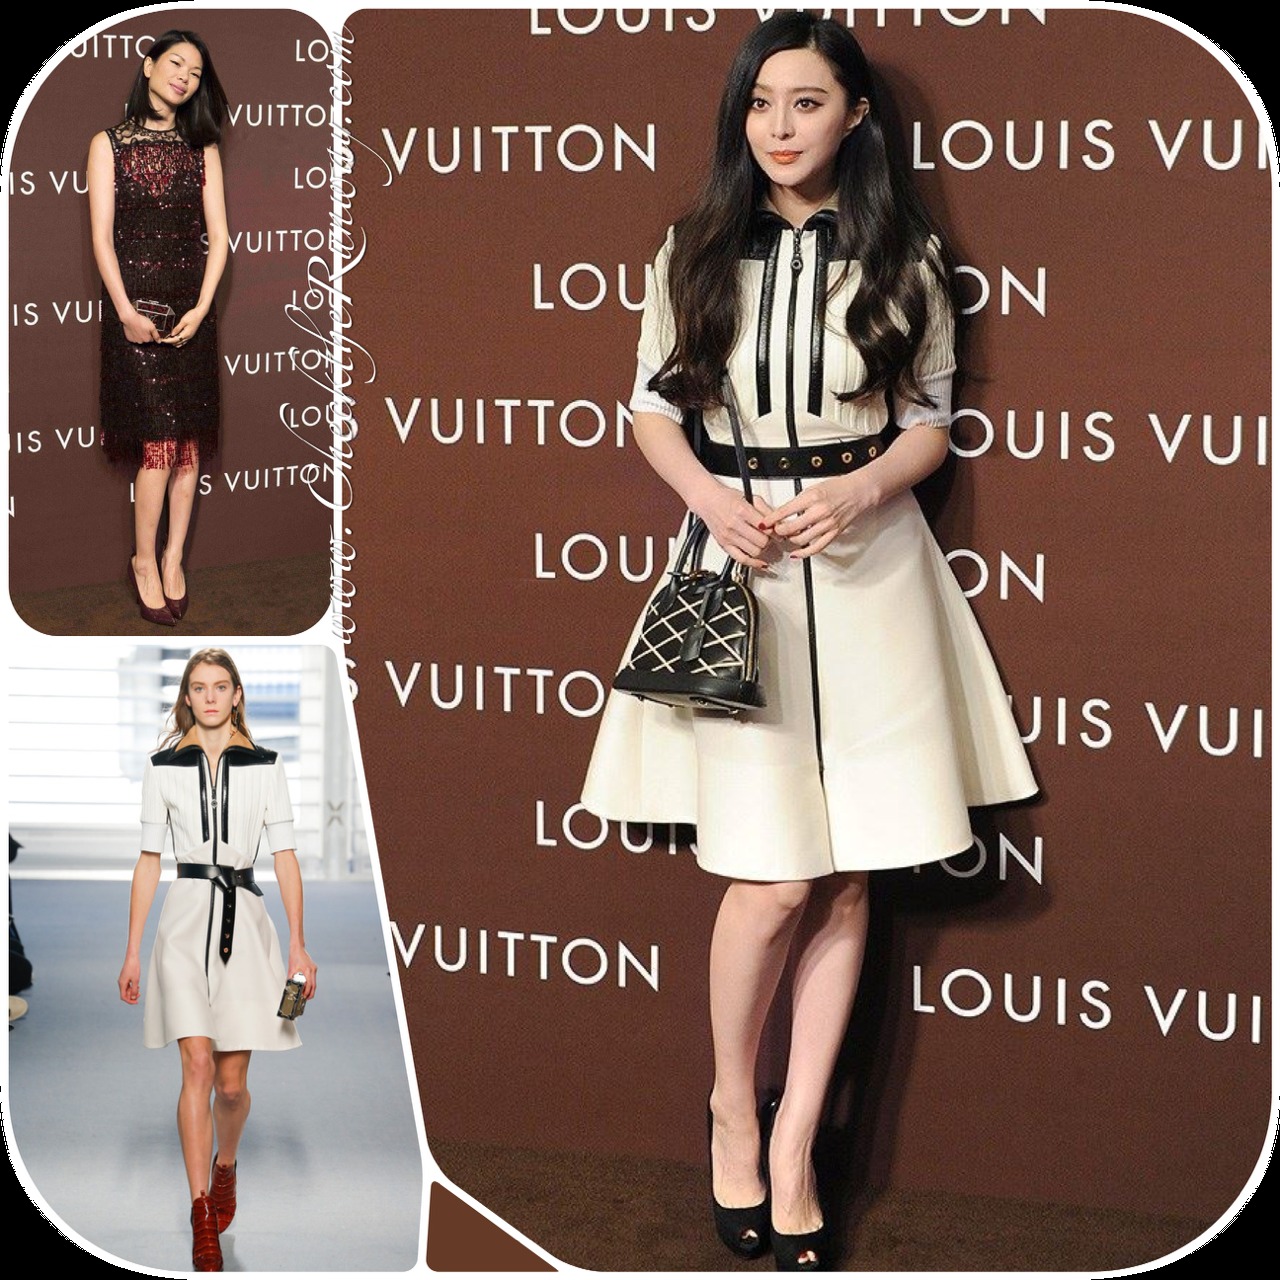 New Louis Vuitton Flagship, China – Checking the Runway for Uber Fashion that mooves and shakes!